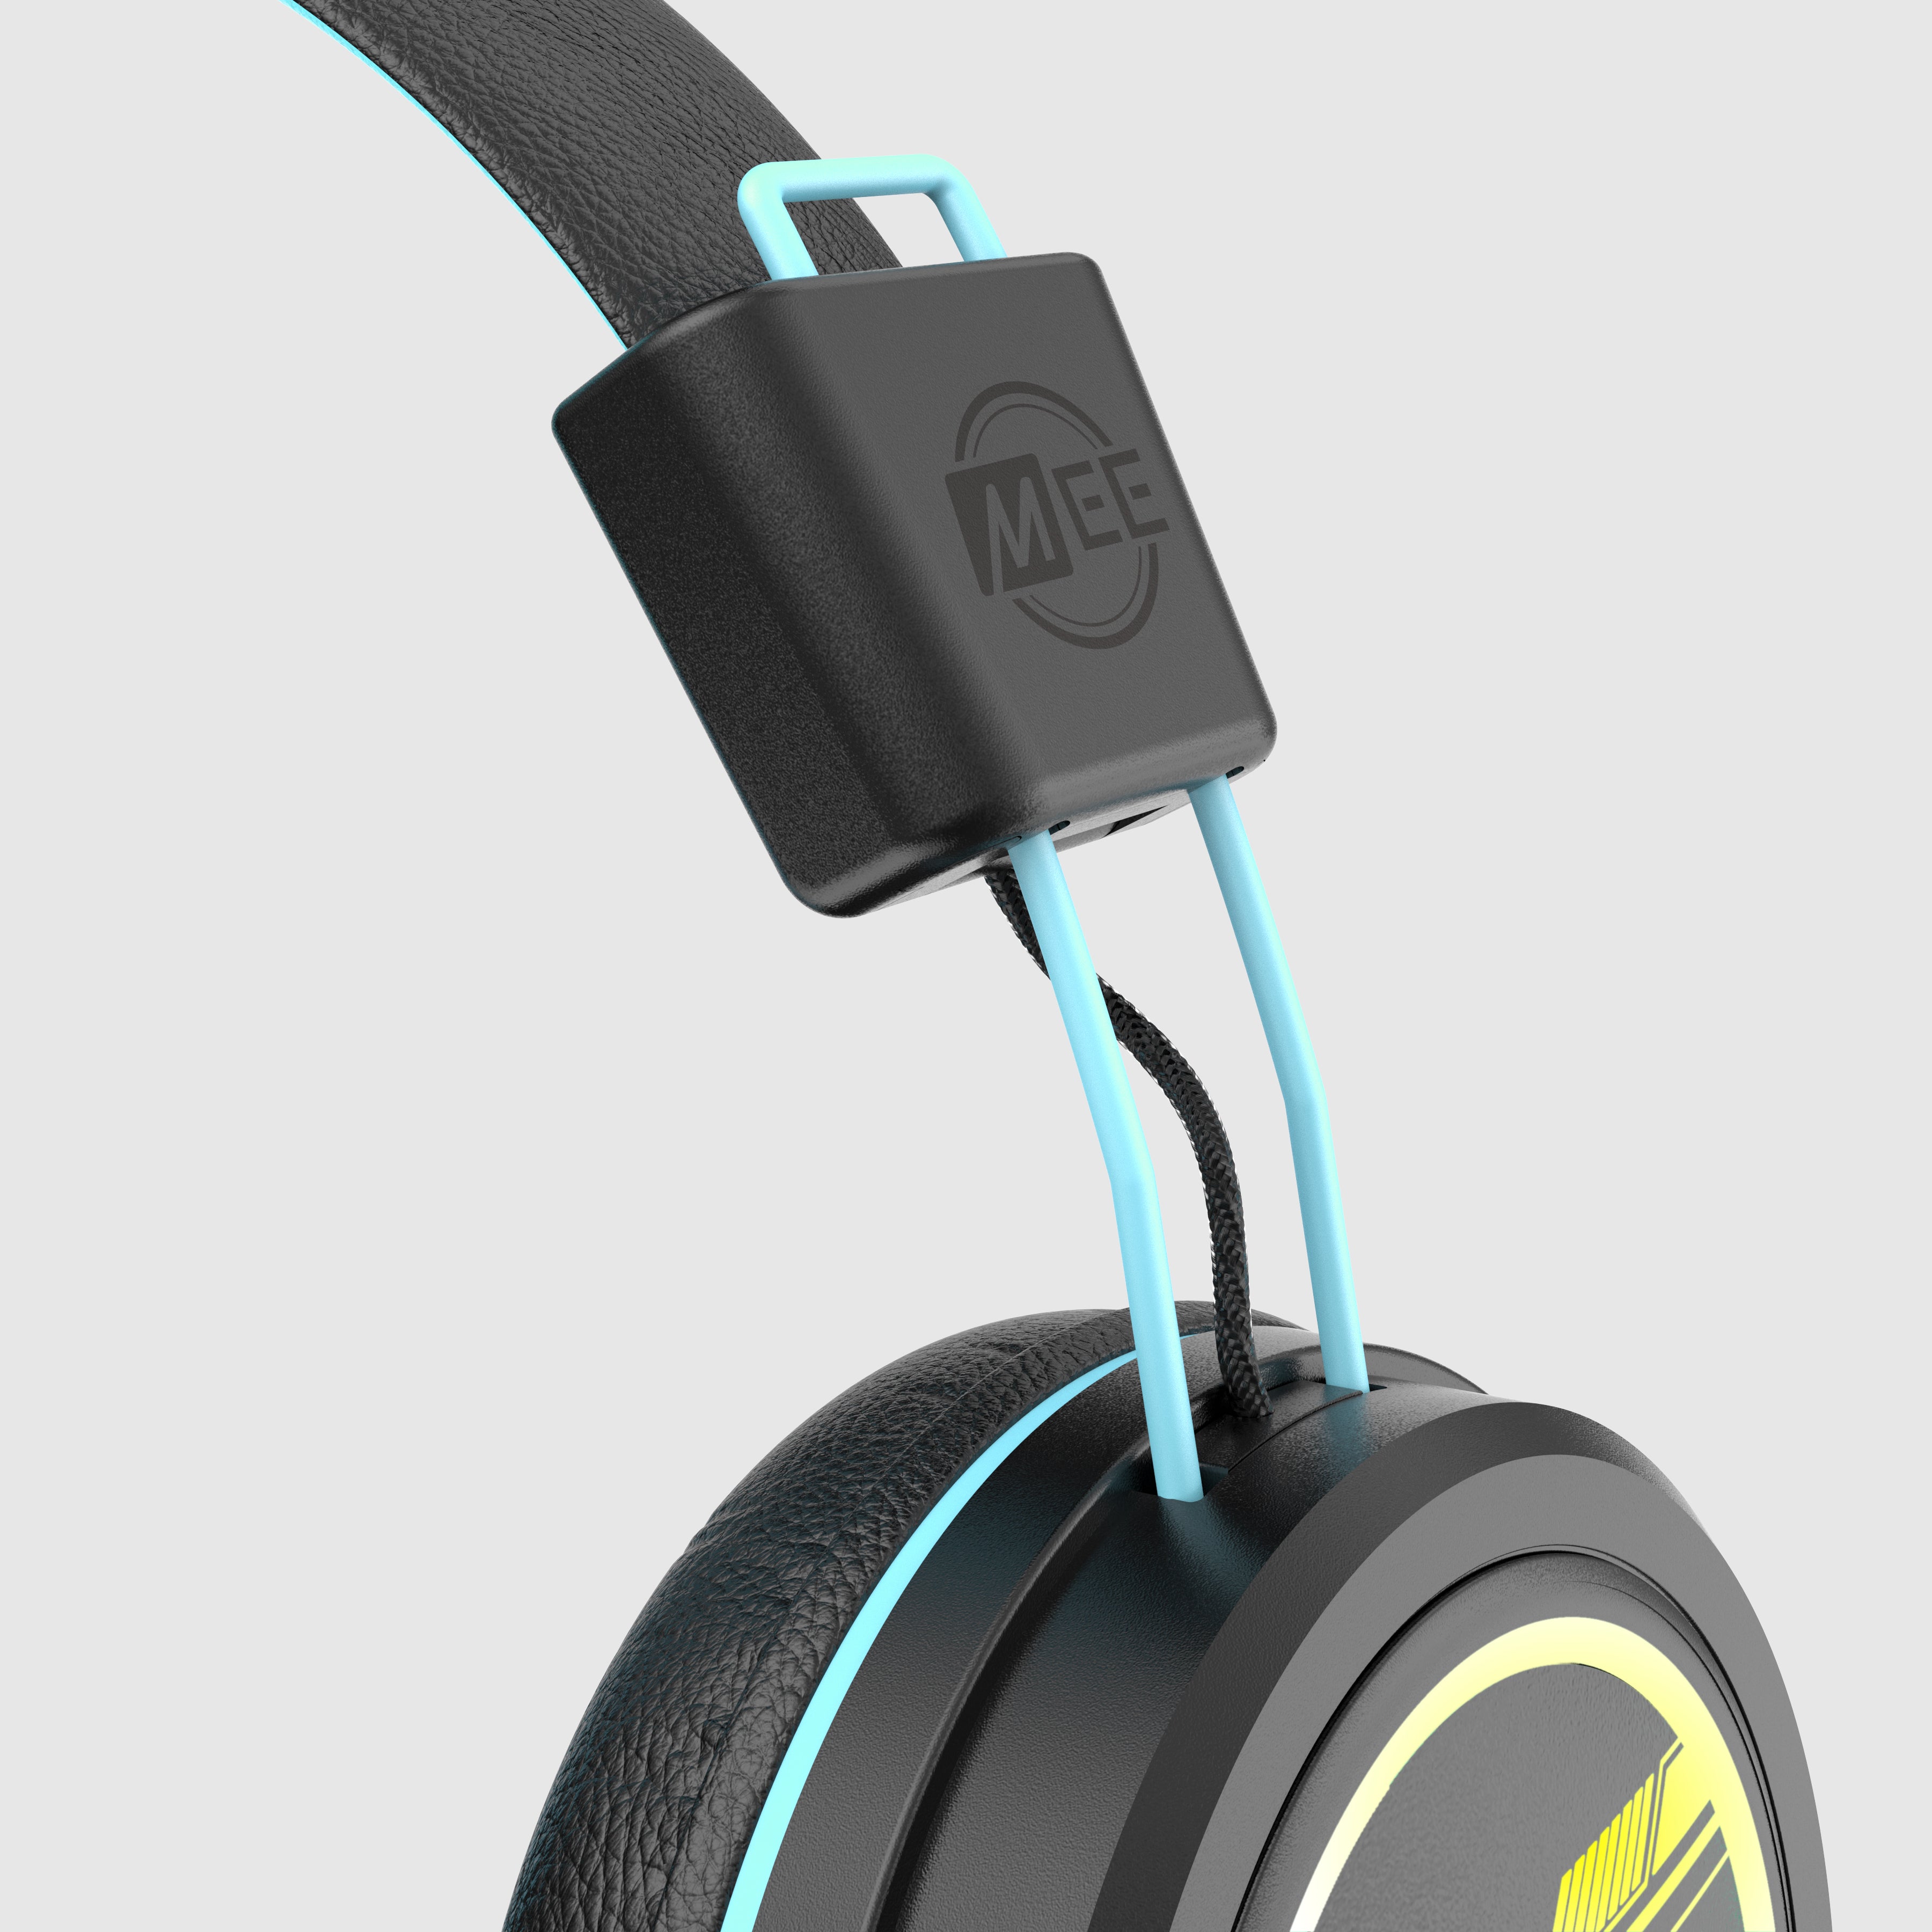 Close-up of a modern headphone, highlighting a sleek design with a blue audio cable connected to an earcup featuring a neon blue trim and a branded logo.